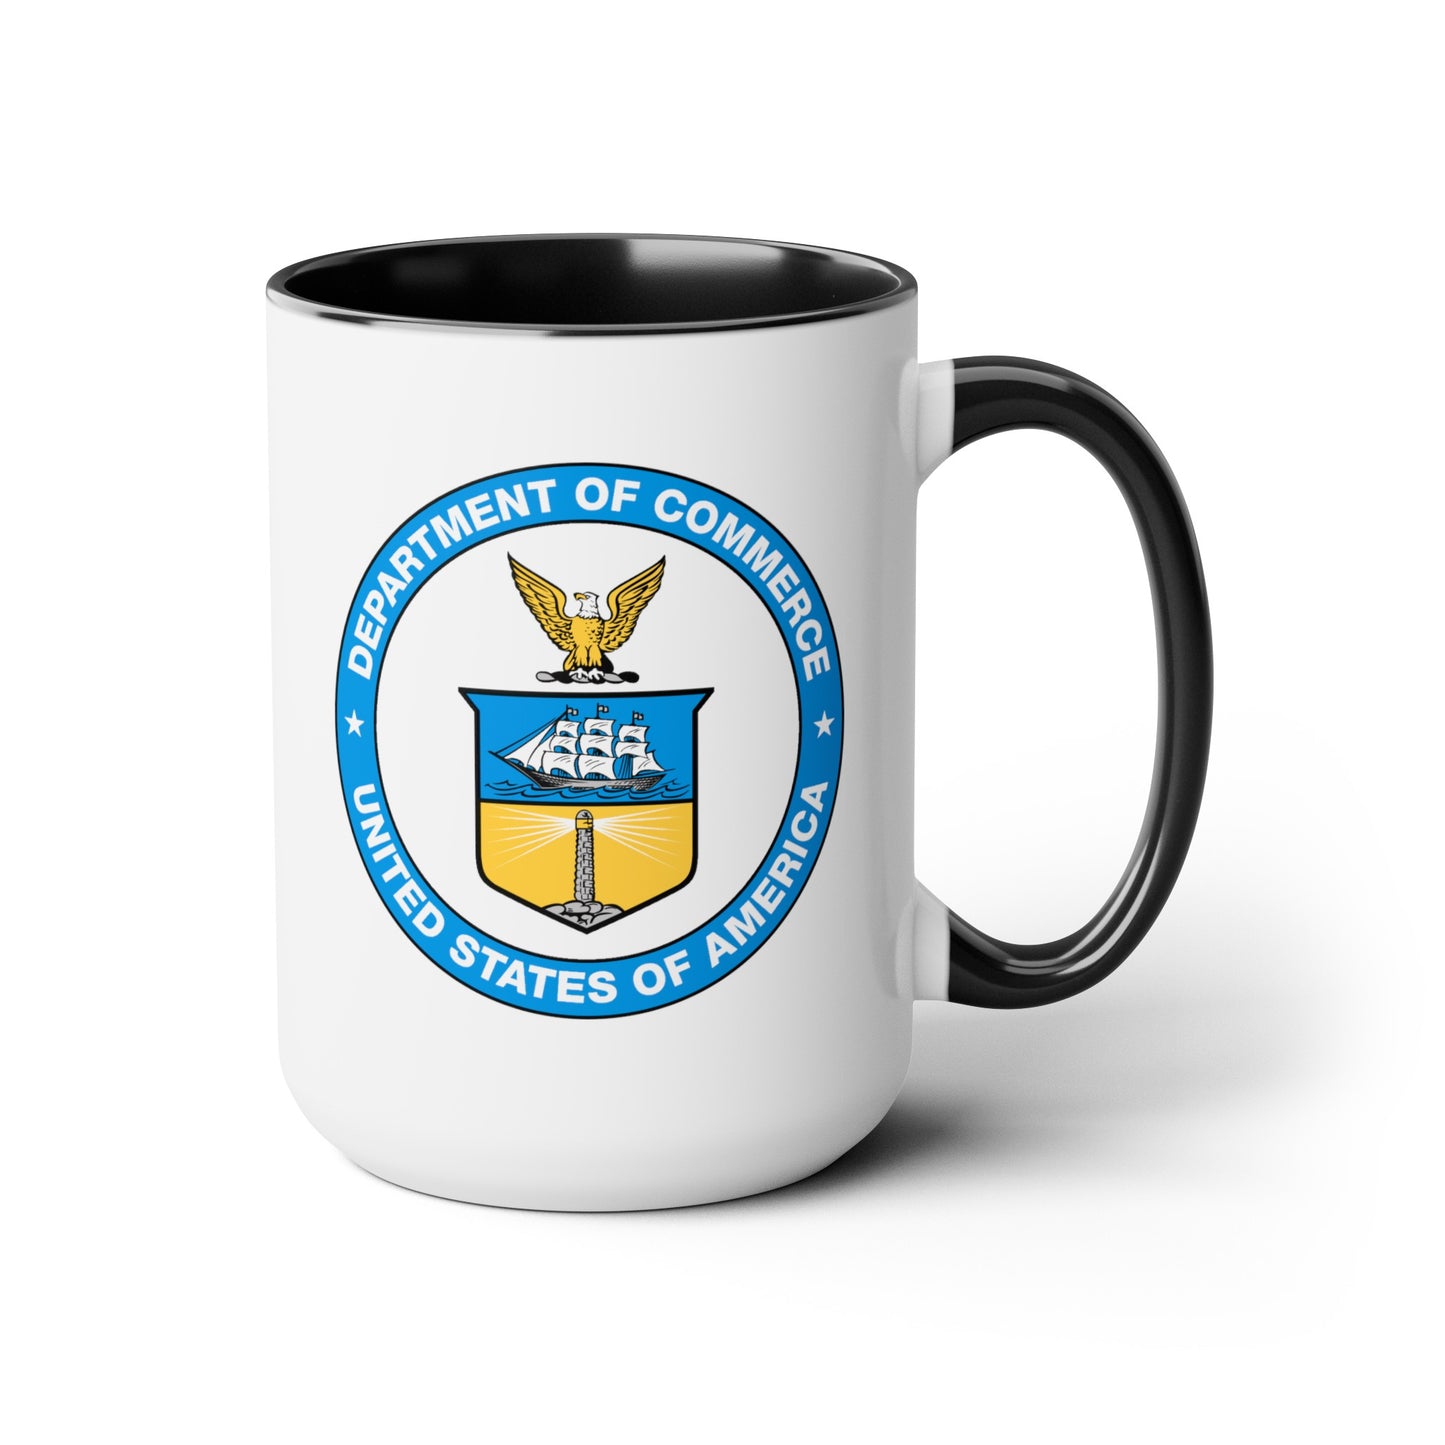 Department of Commerce Coffee Mug - Double Sided Black Accent White Ceramic 15oz TheGlassyLass